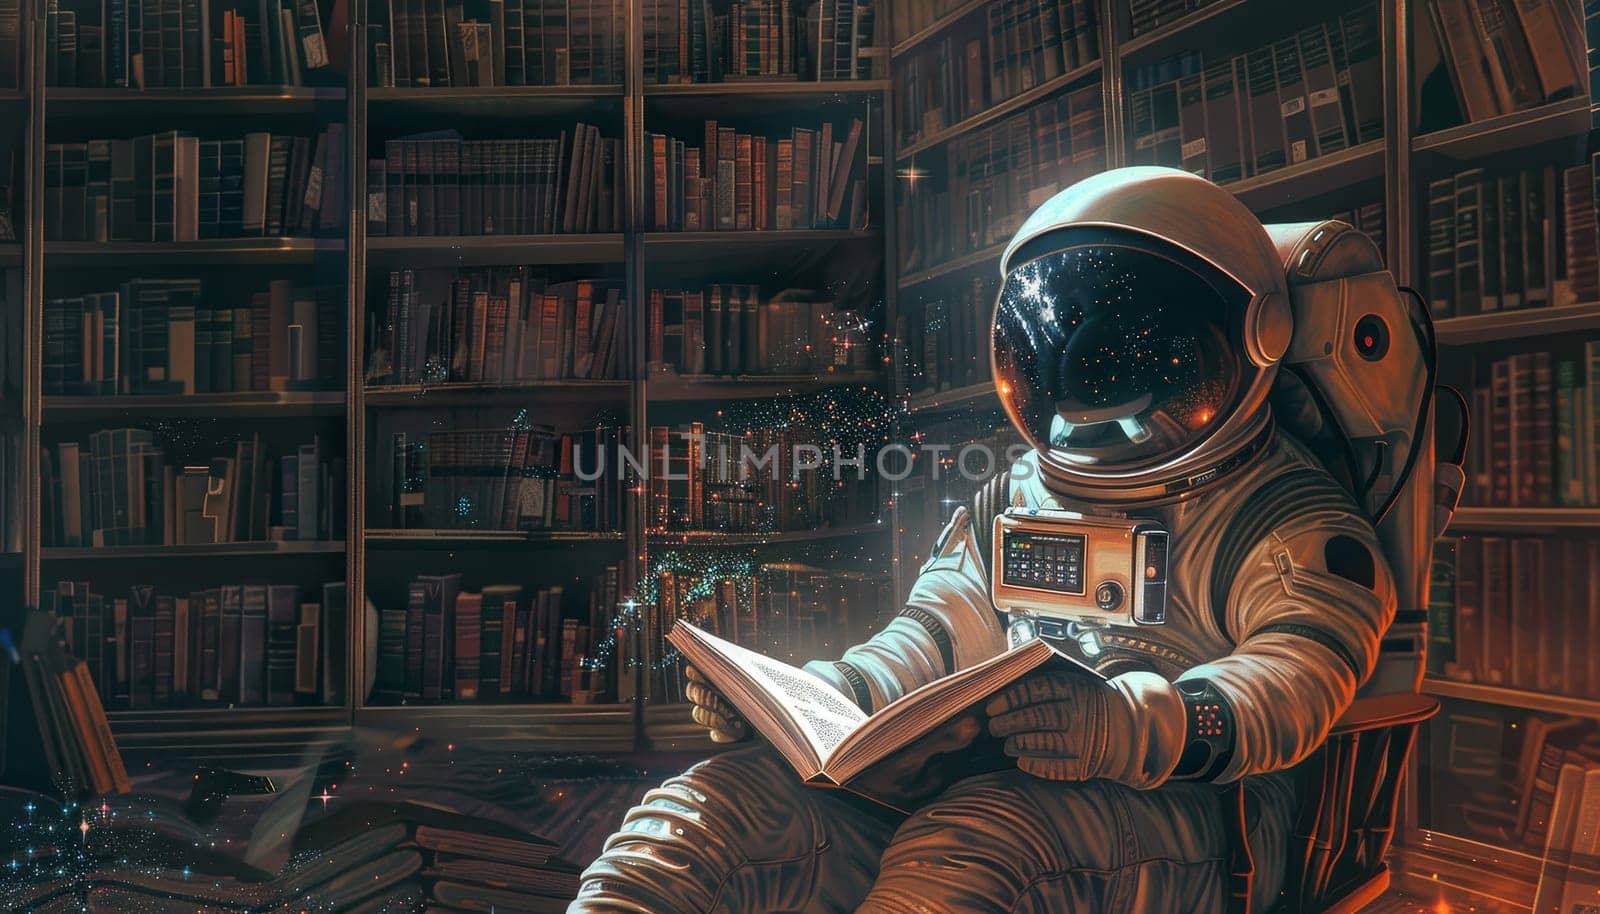 A man in a spacesuit is reading a book in a library by AI generated image.